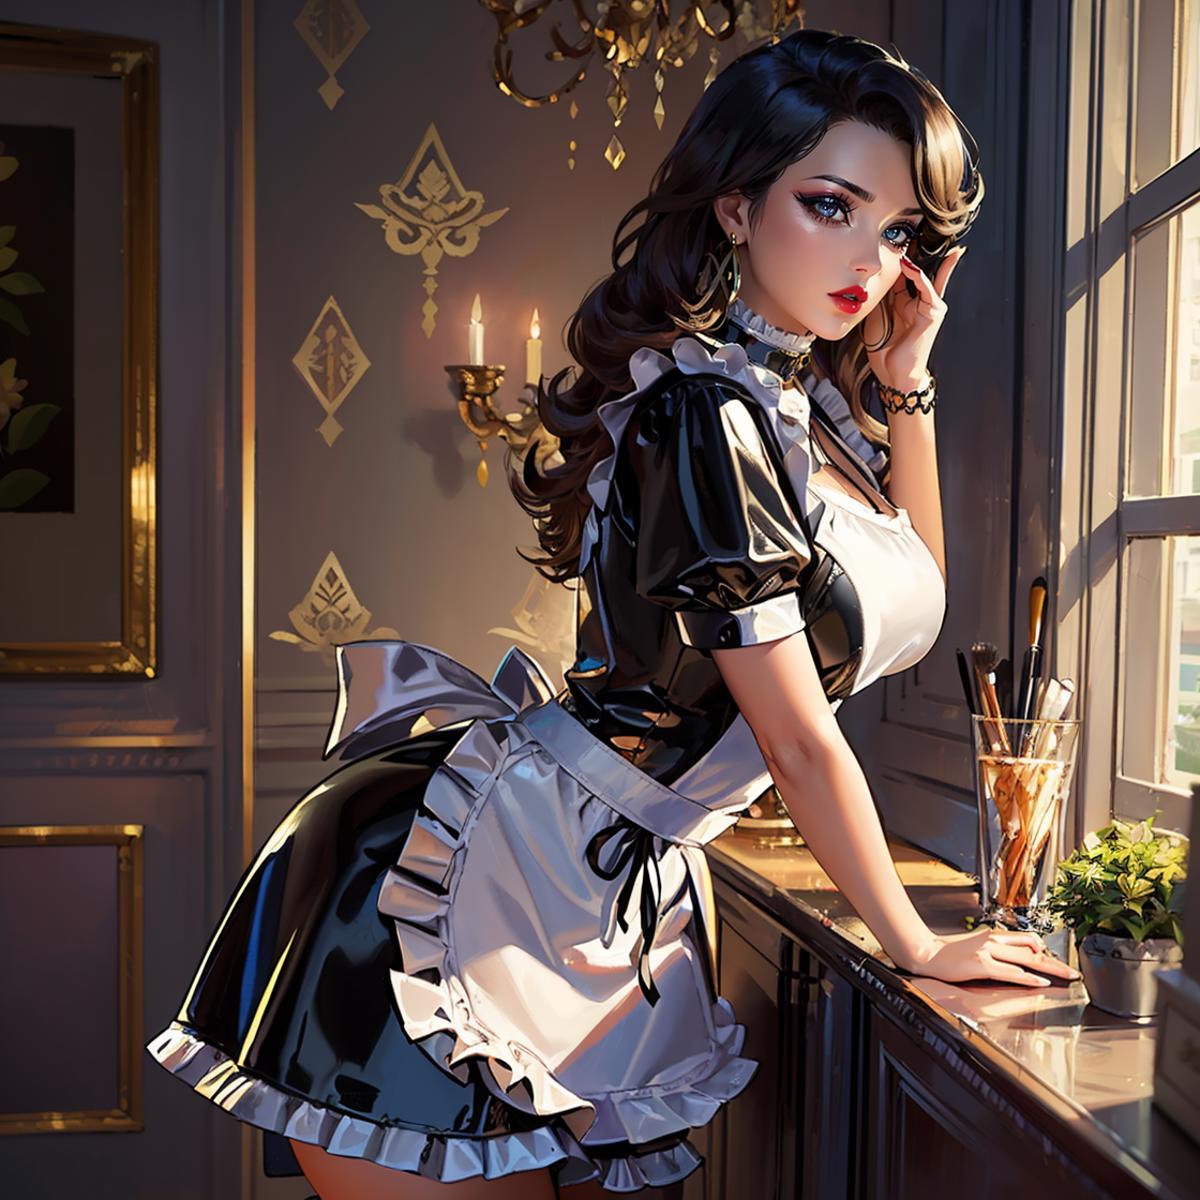 Maid image by headupdef